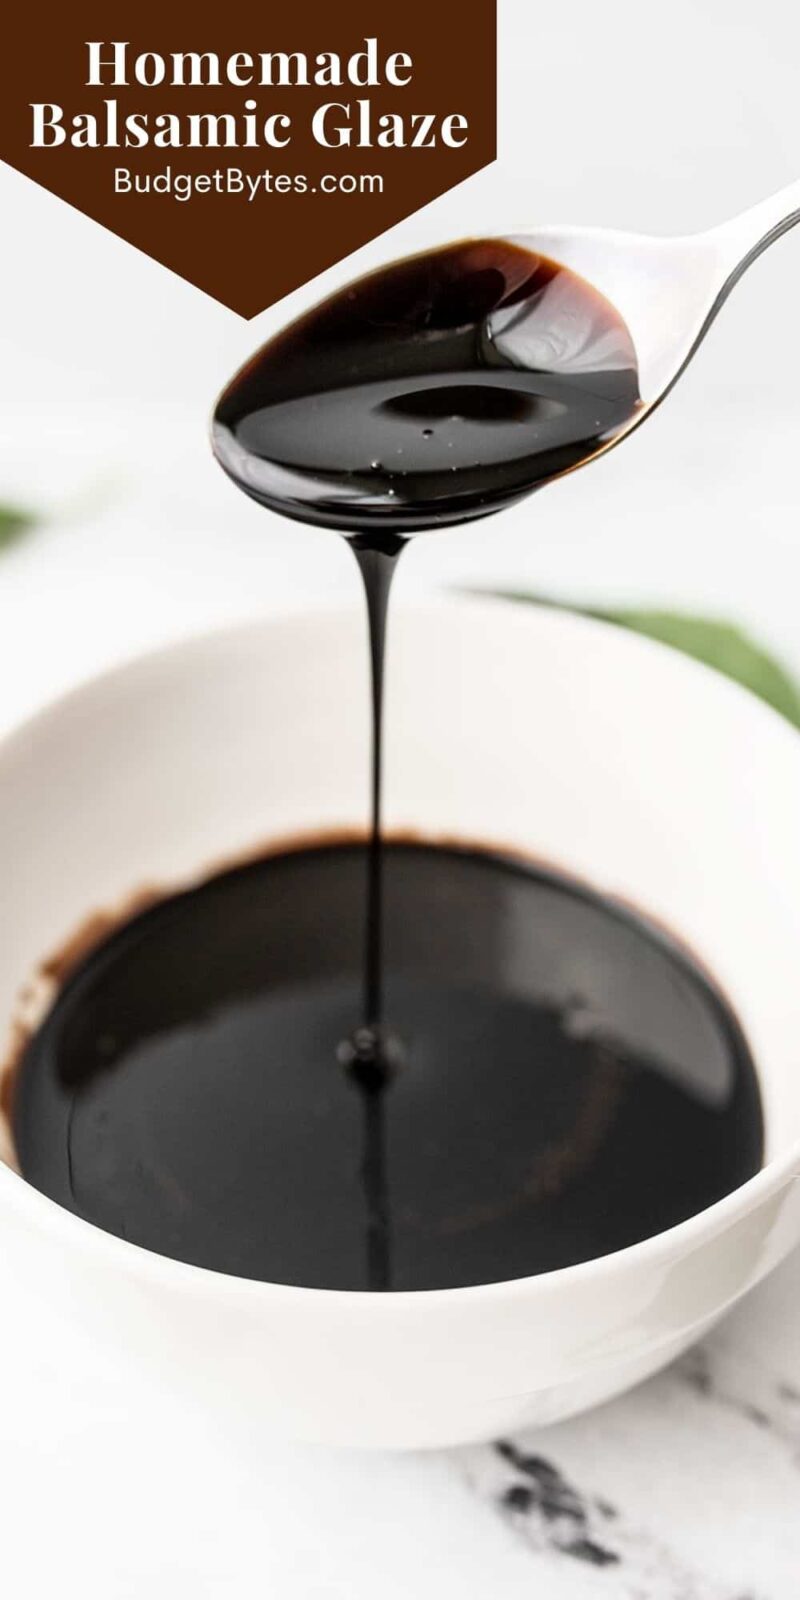 balsamic glaze dripping off a spoon in to a bowl, title text at the top